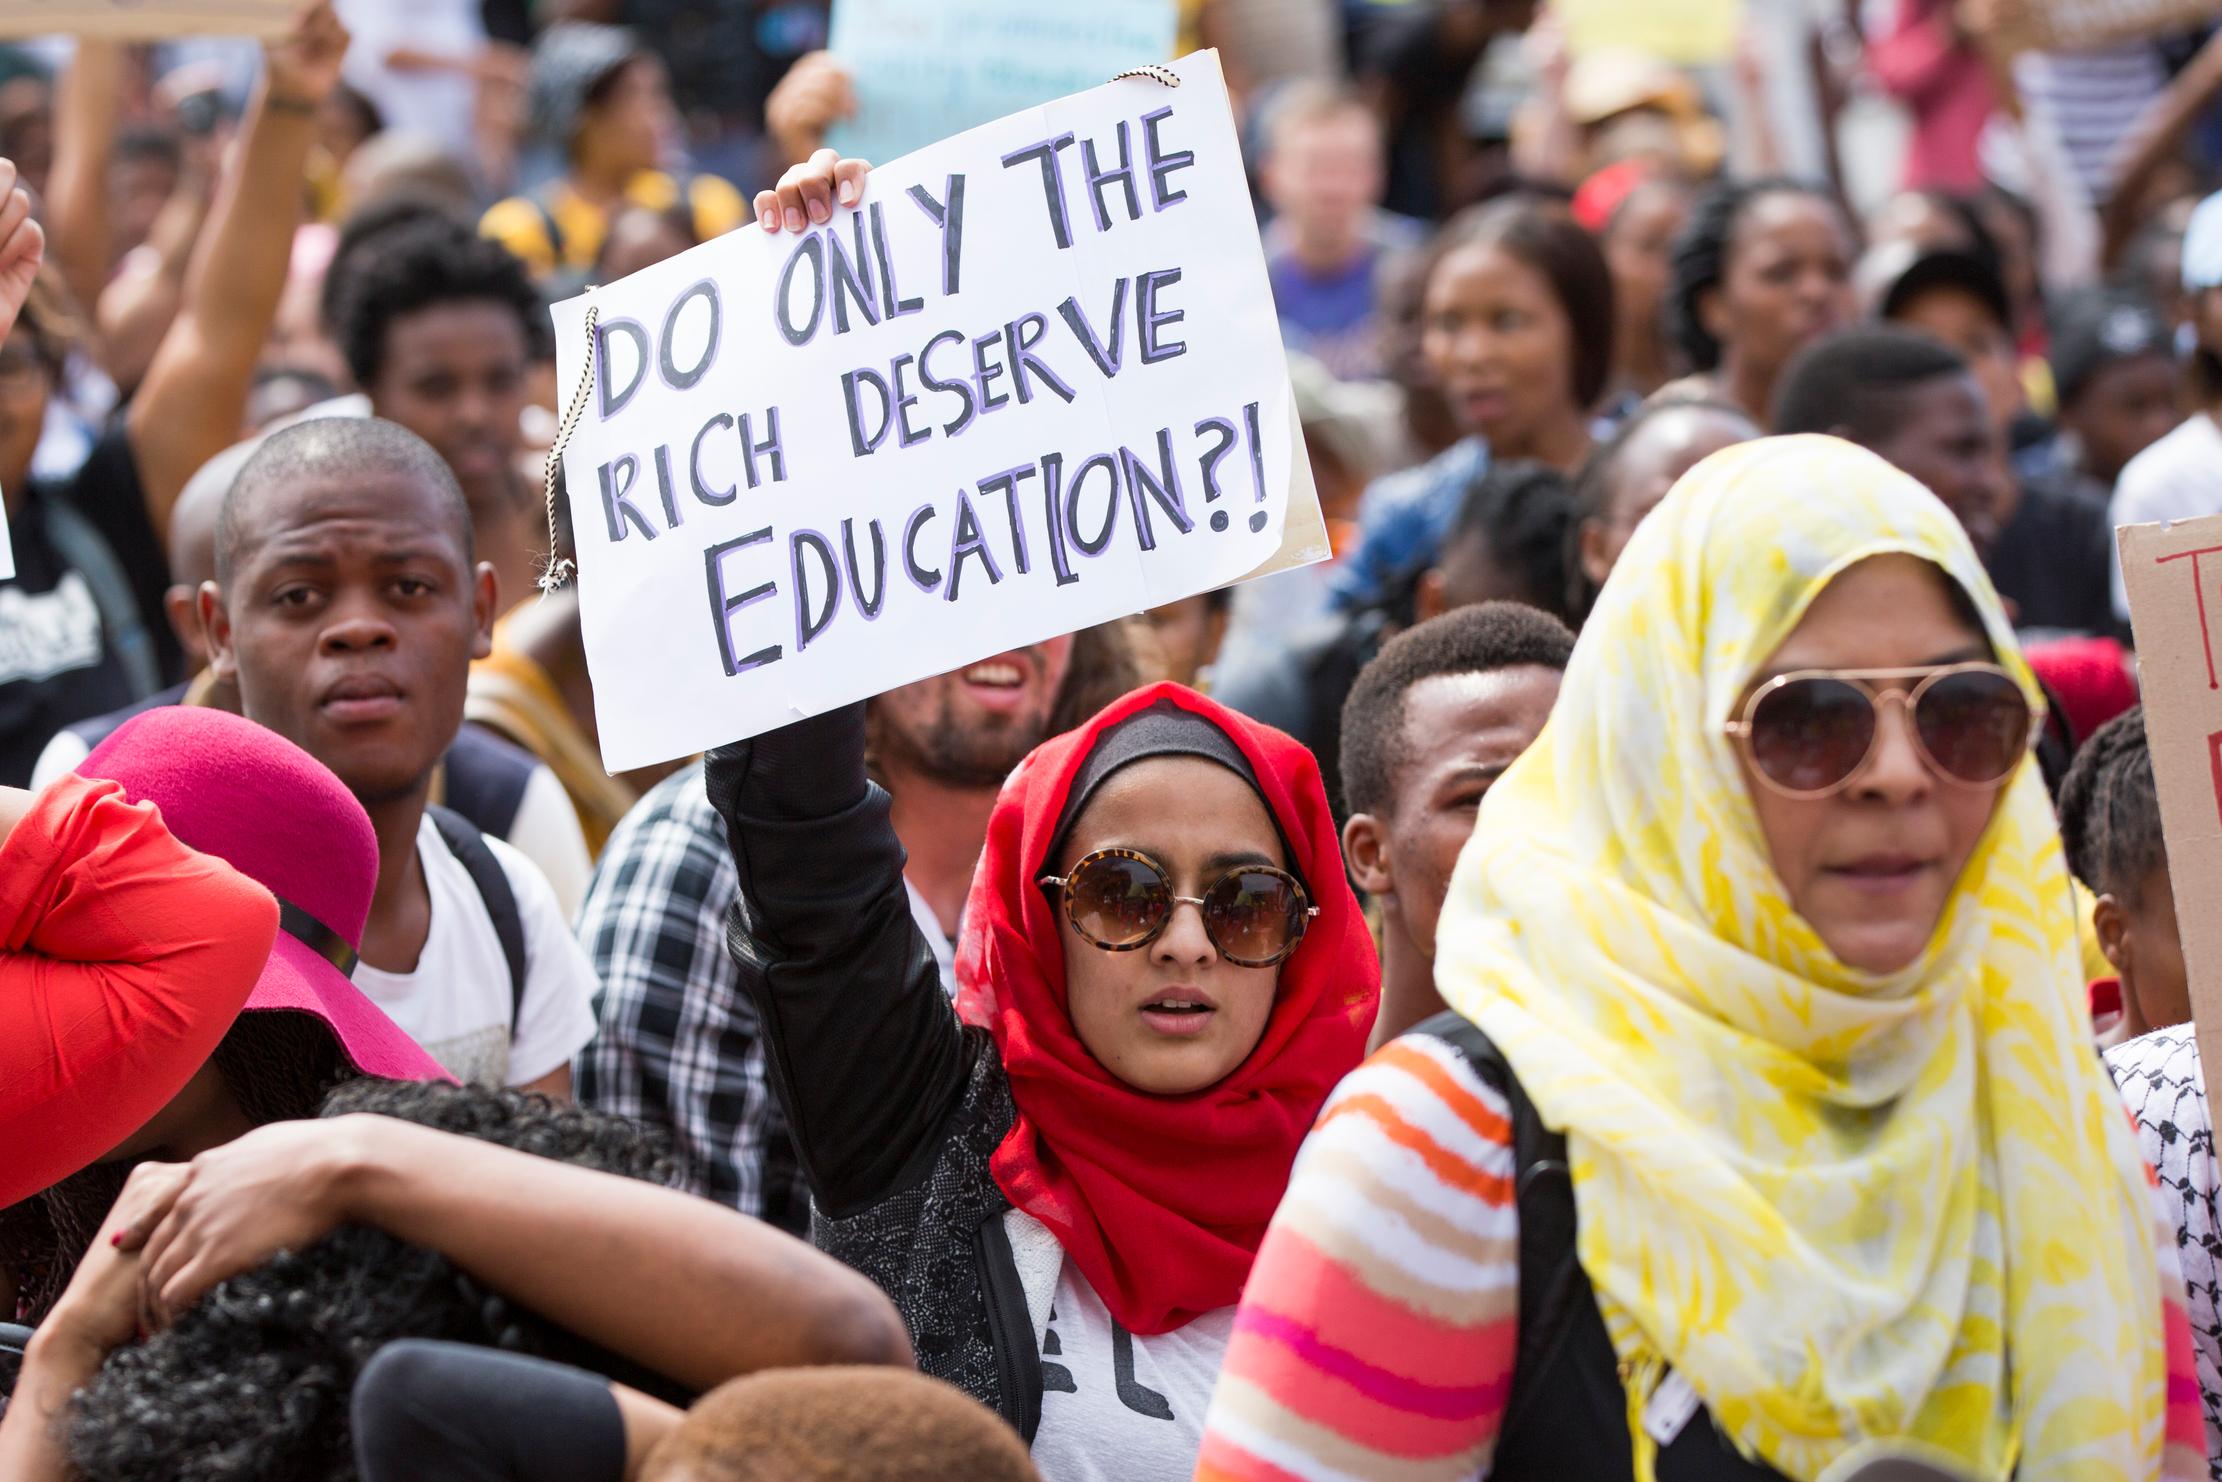 A woman standing in a large crowd holds a sign questioning whether only the rich deserve an education.